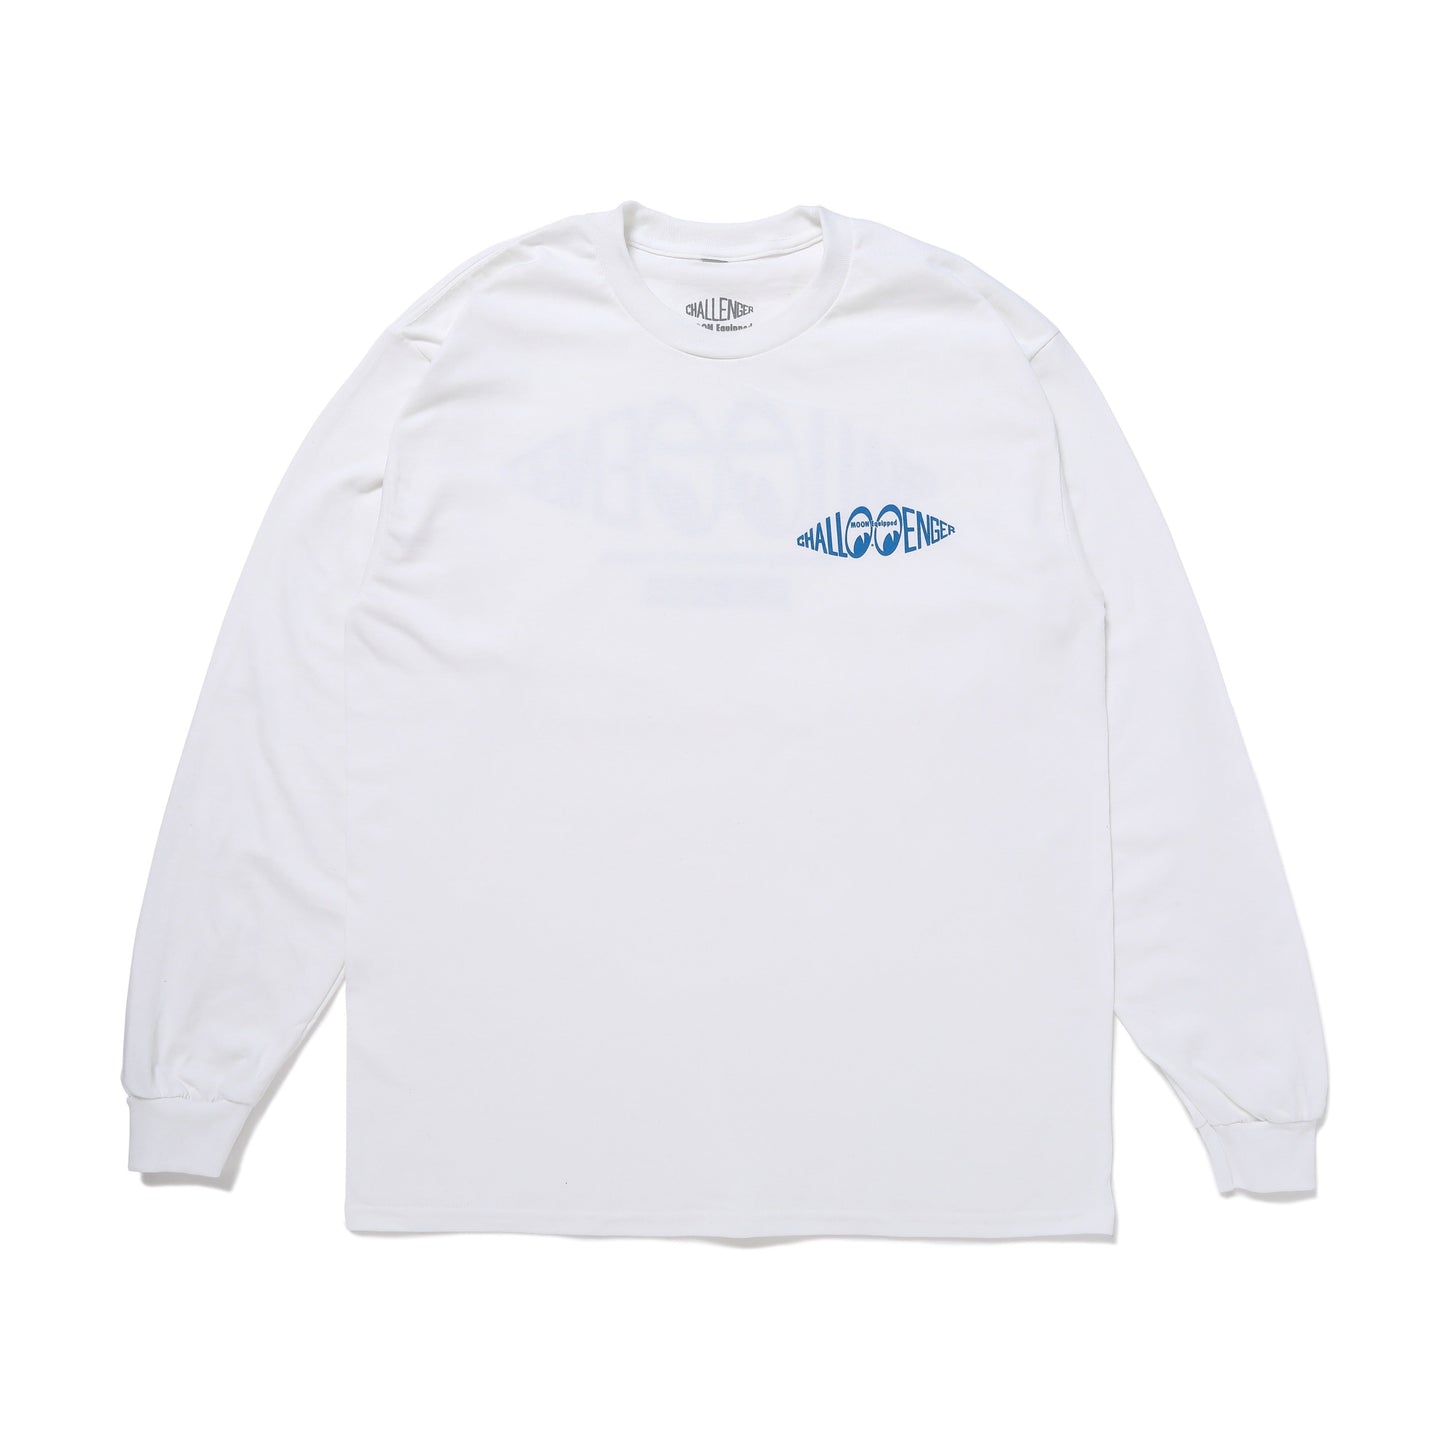 CHALLENGER × MOON EQUIPPED L/S TEE